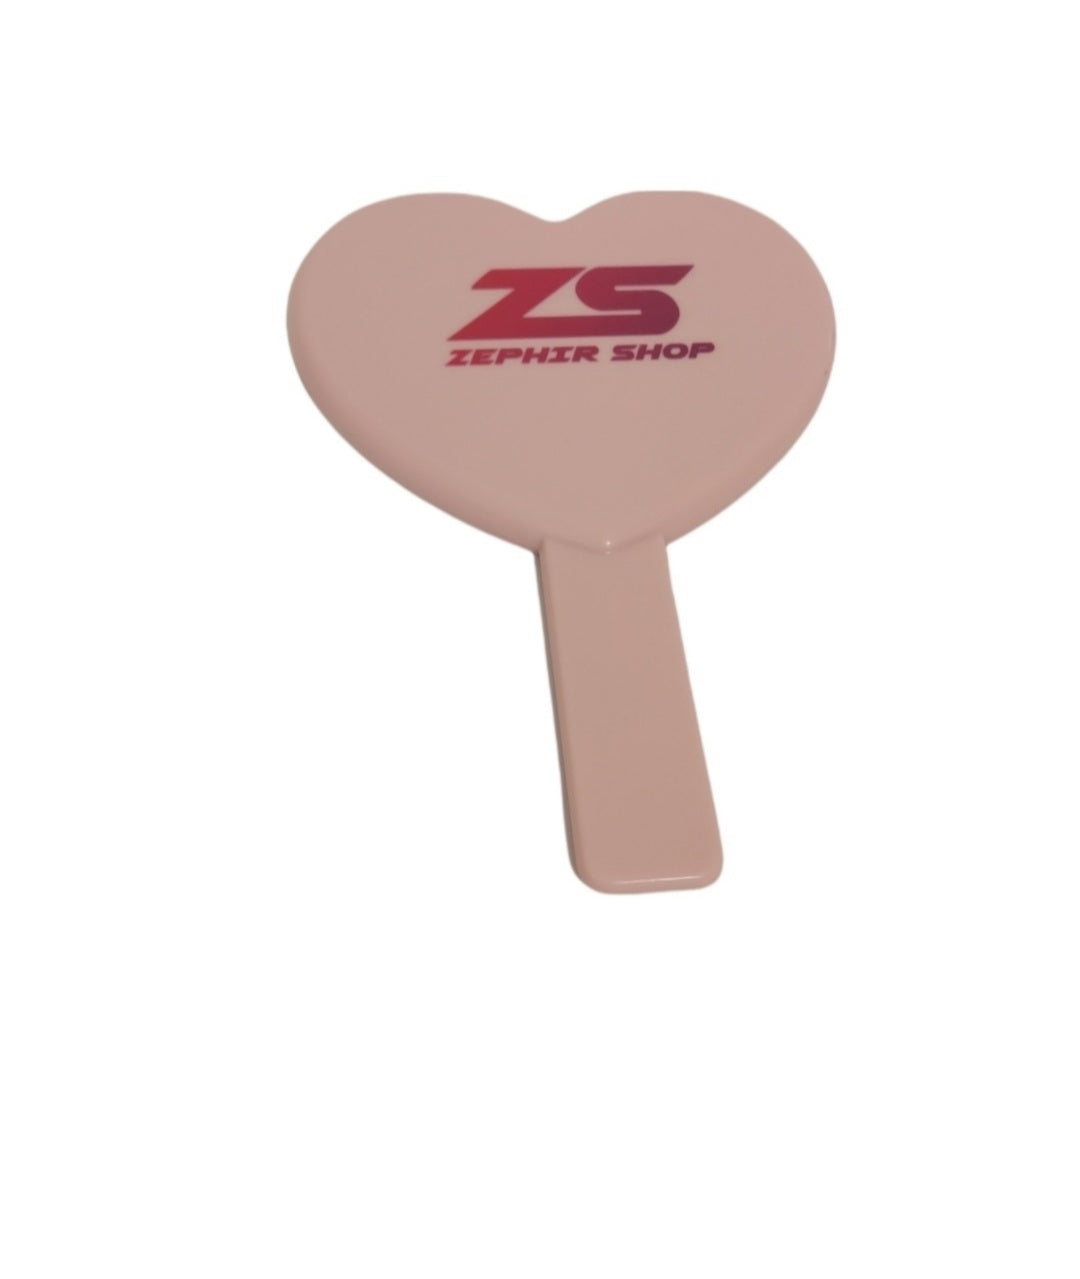 ZS Heart Shaped Handheld mirror Cosmetic Make up Mirror With Handled